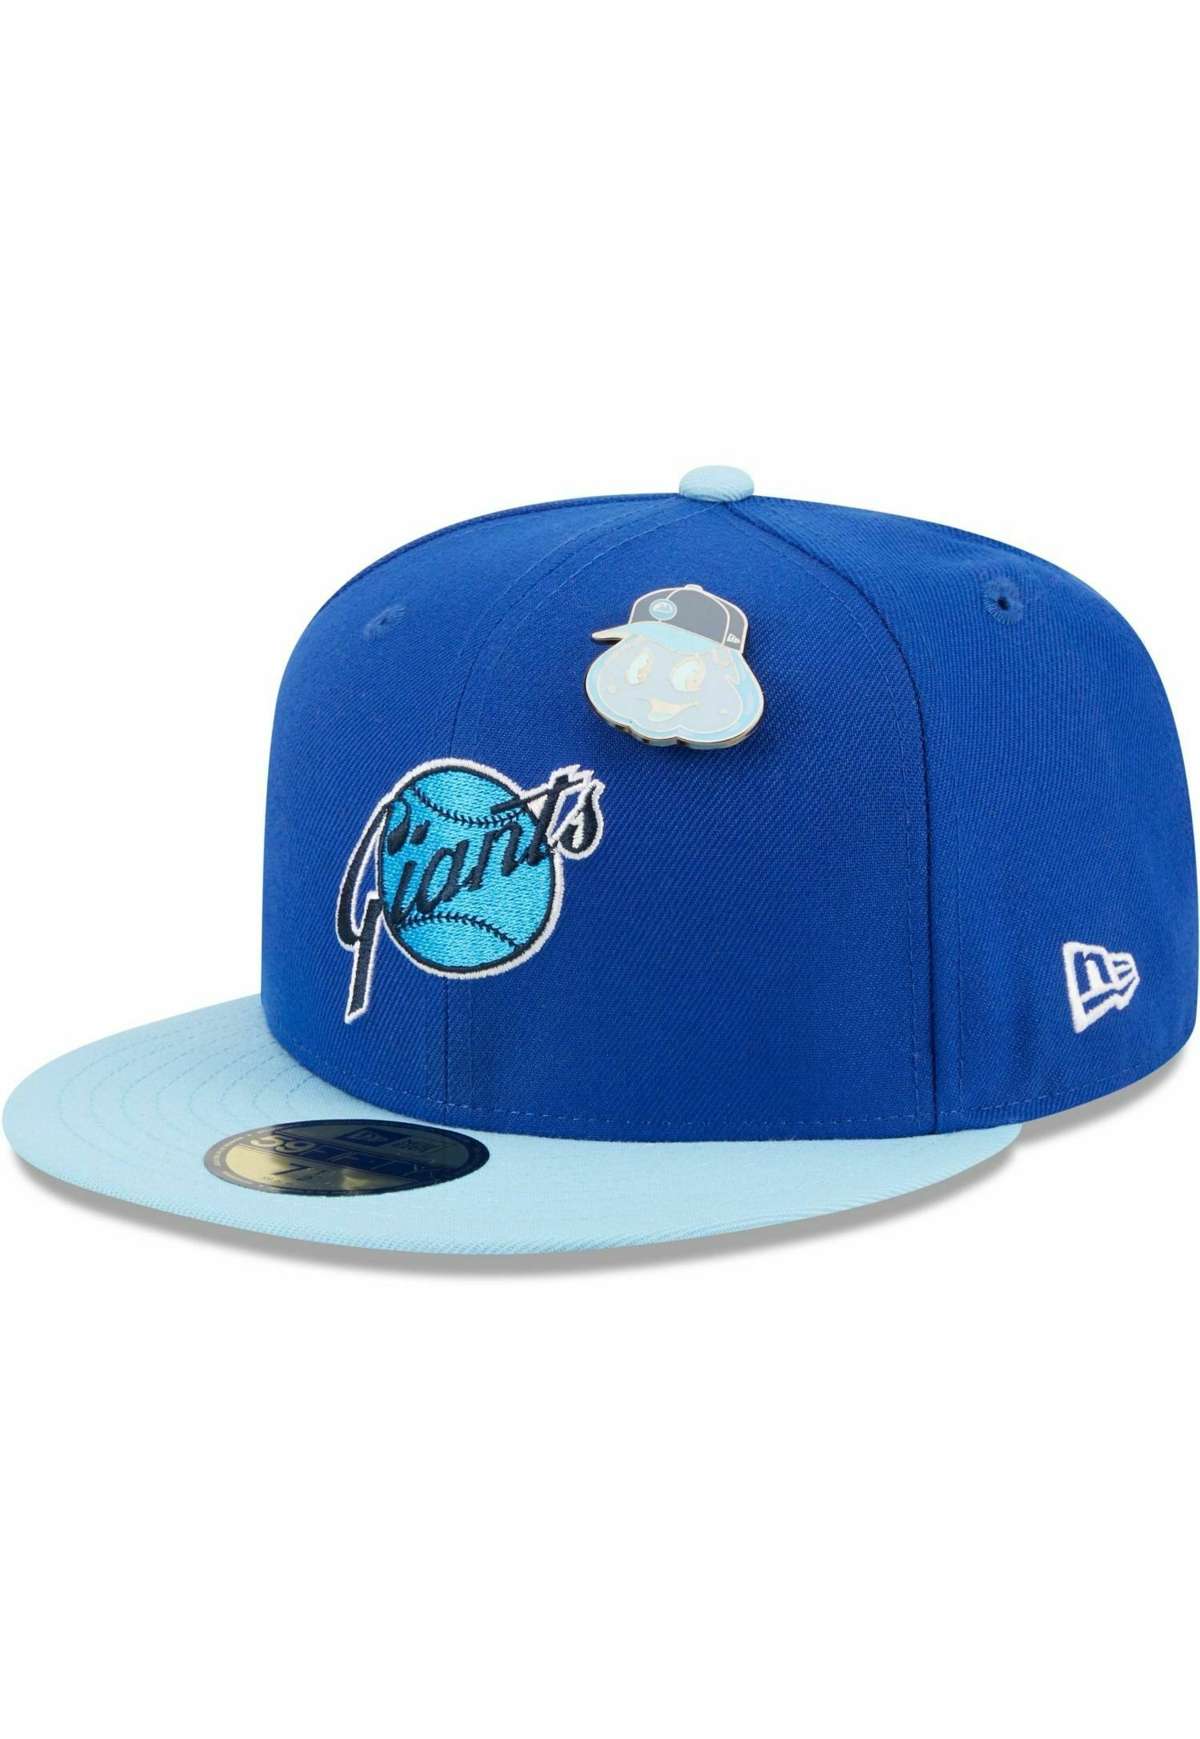 Кепка 59FIFTY PIN FLORIDA MARLINS